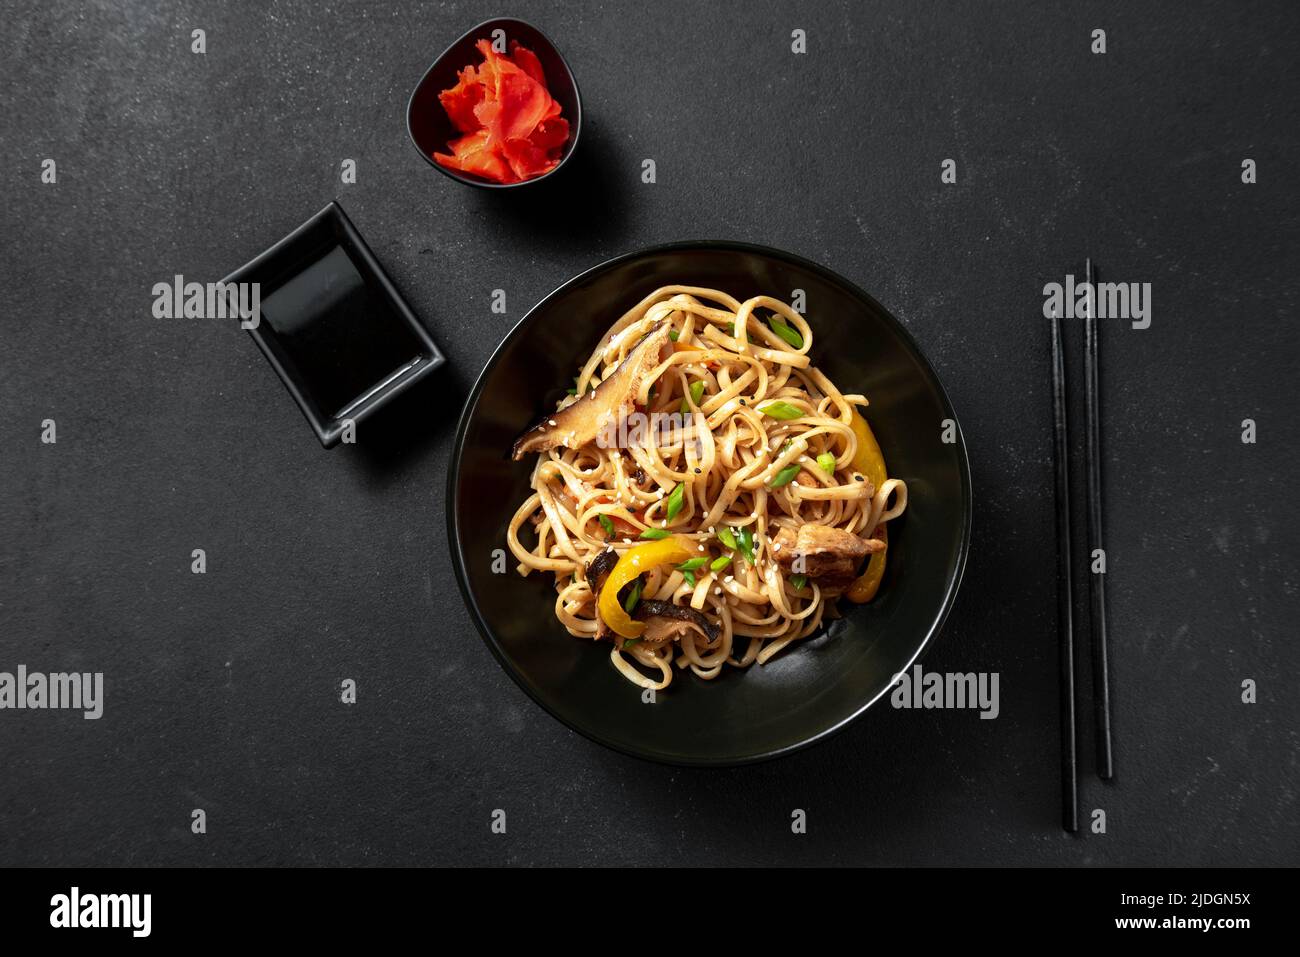 Vegetarian Schezwan Noodles or Vegetable Hakka Noodles or Chow Mein in black bowl at dark background. Schezwan Noodles is indo-chinese cuisine hot dis Stock Photo